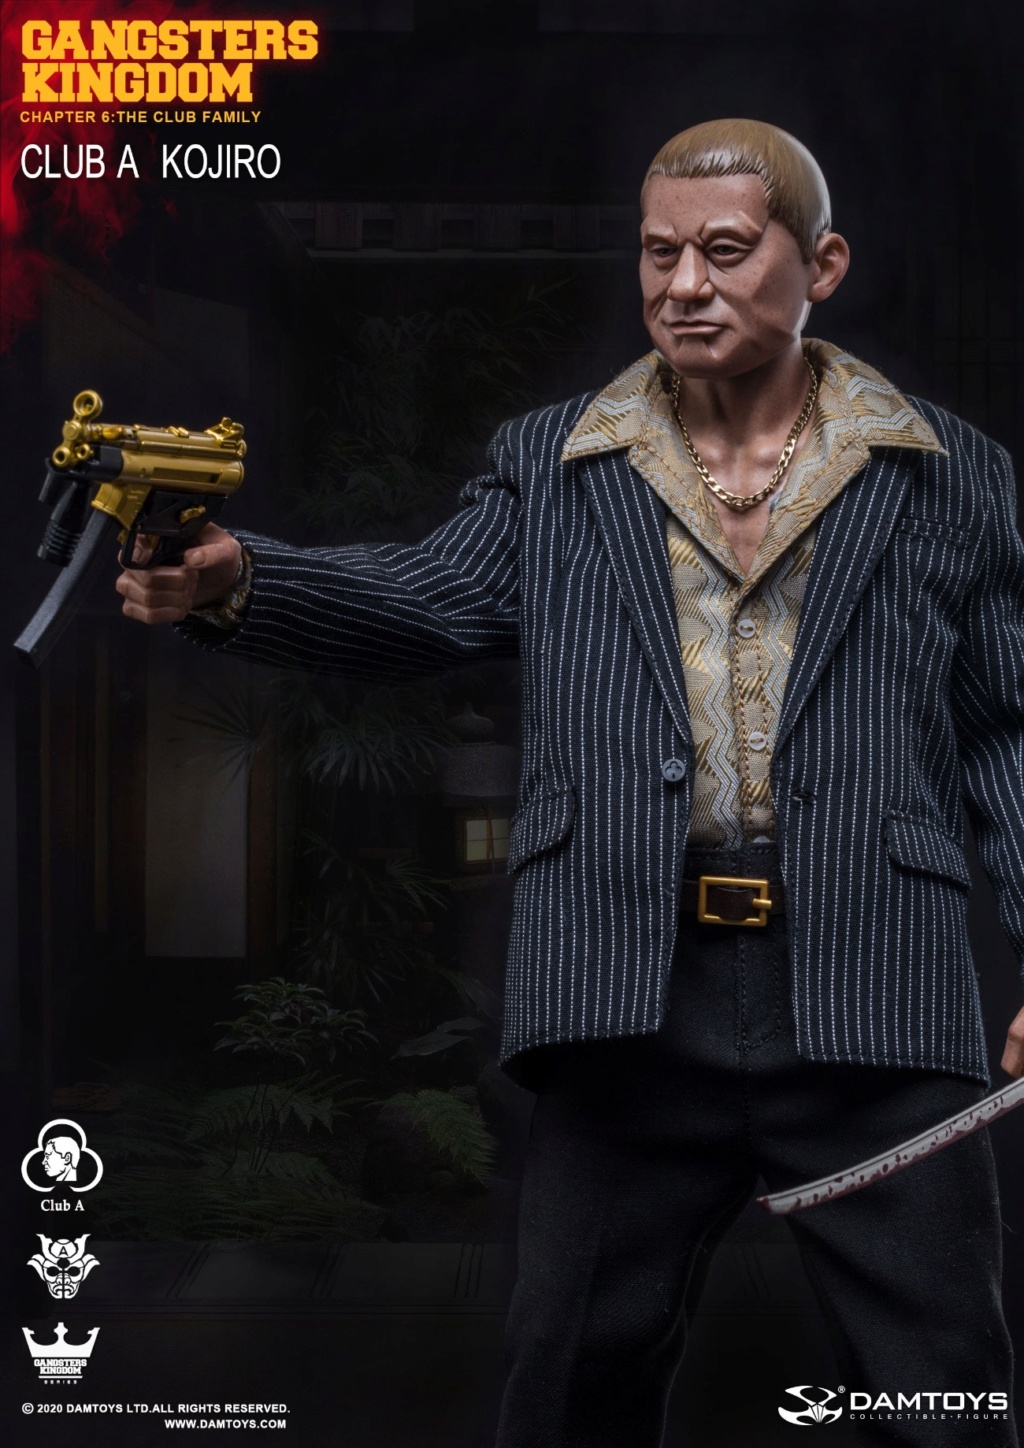 NEW PRODUCT: DamToys: 1/6 Gangster Kingdom-Grass Flower A KOJIRO Action Figure & Coffee Table Accessory Bag #GK021 15303911